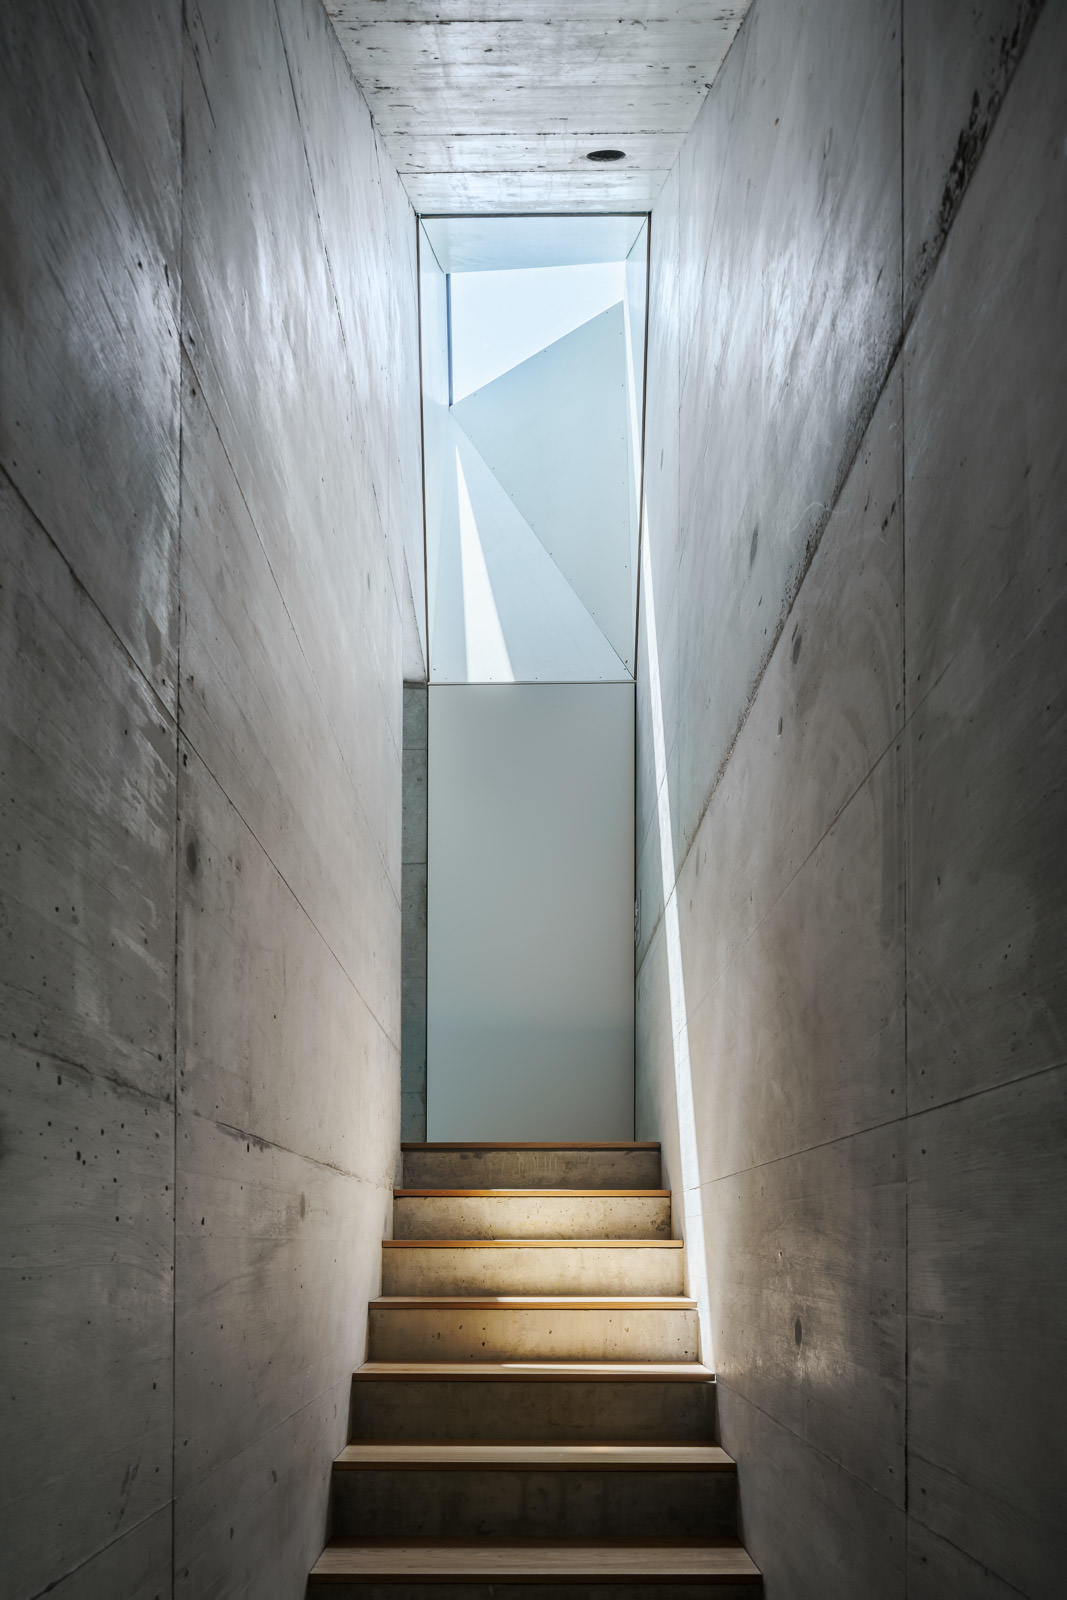 Concrete staircase with ceiling window light coming down the stairs.